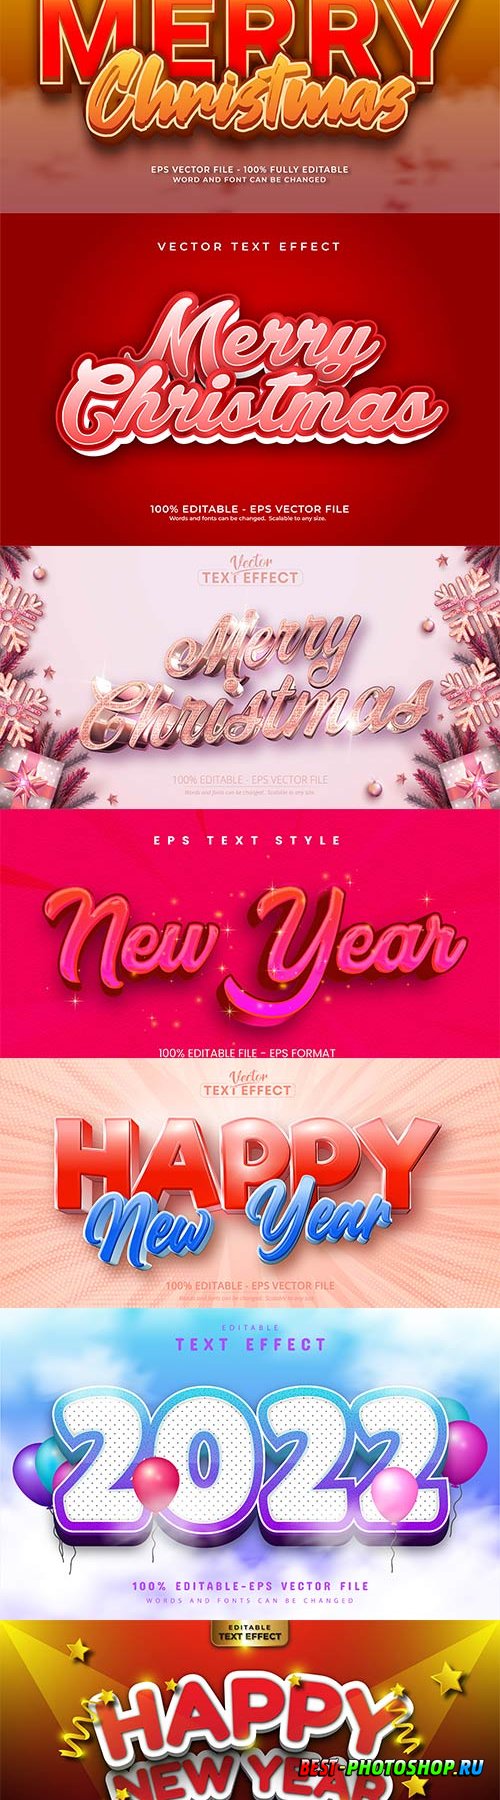 Merry christmas and happy new year 2022 editable vector text effects vol 28